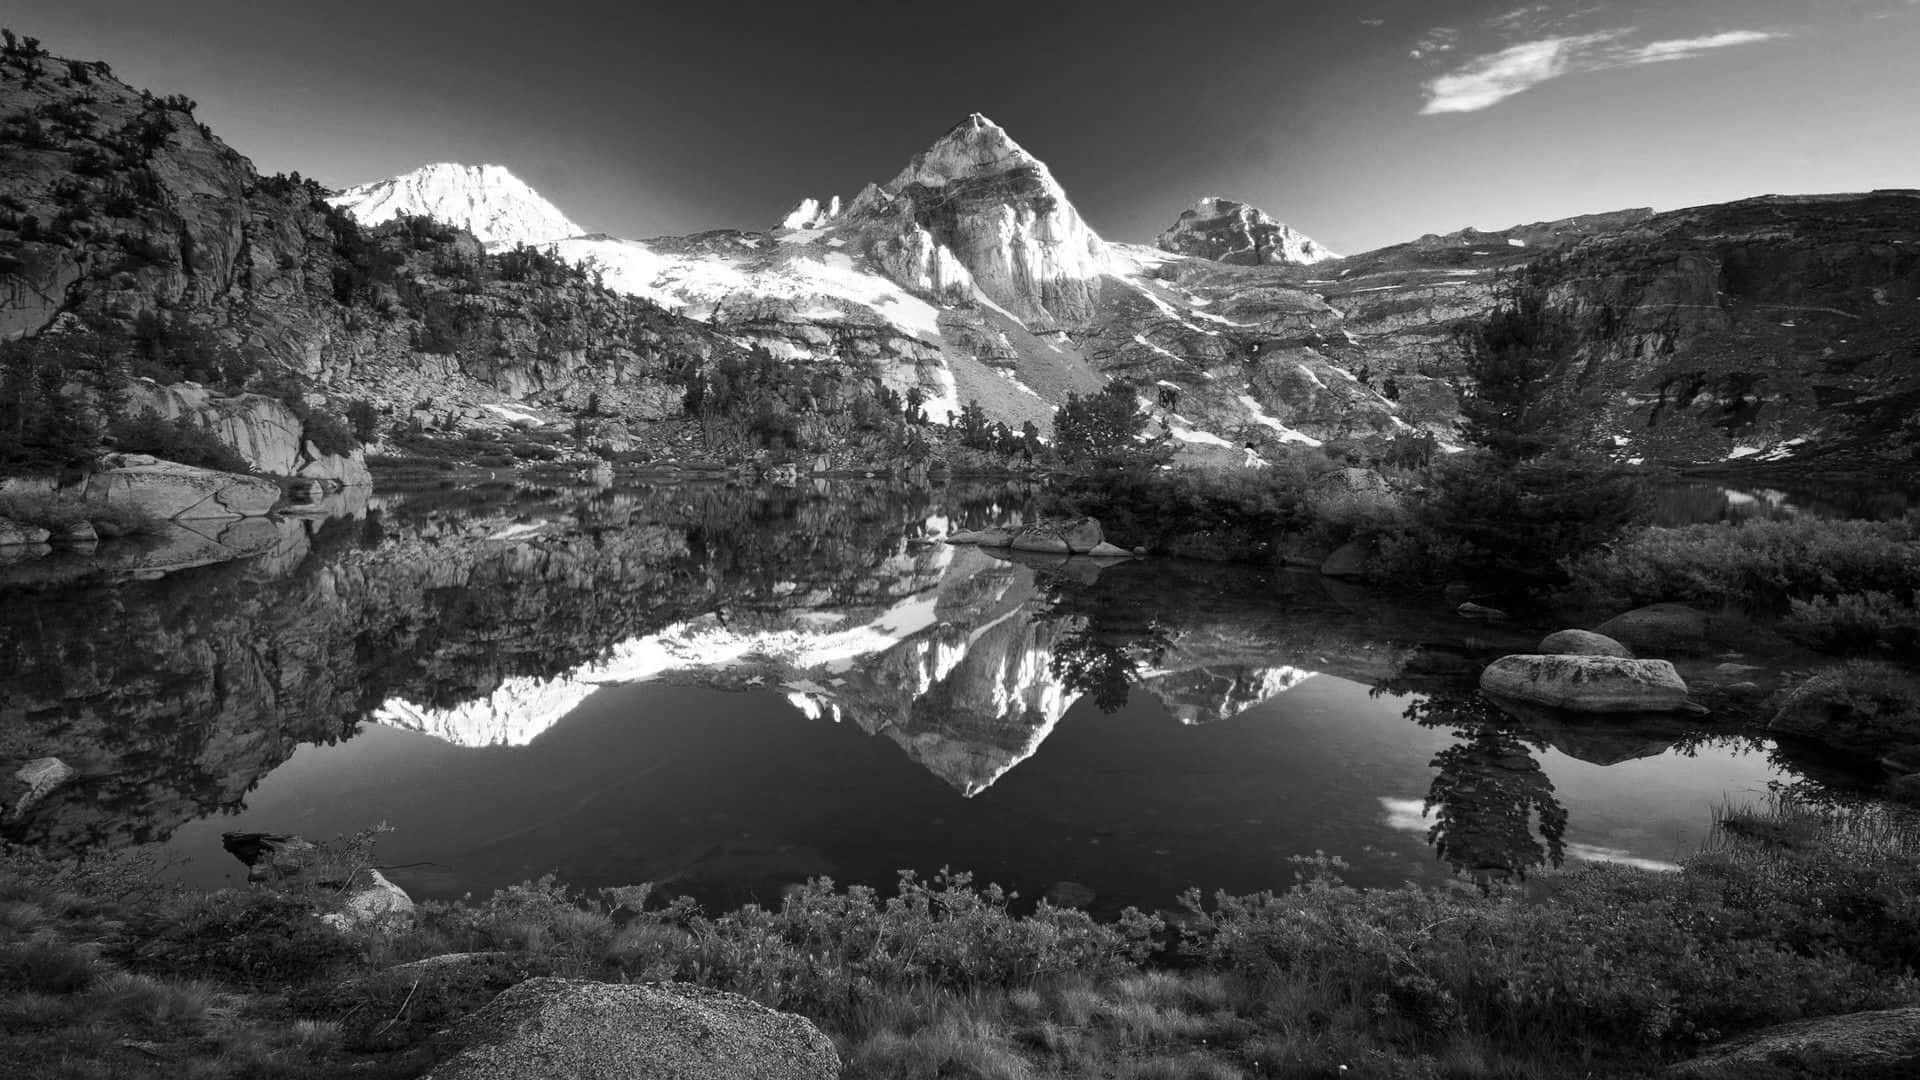 Download Stunning Black and White Landscape Wallpaper | Wallpapers.com